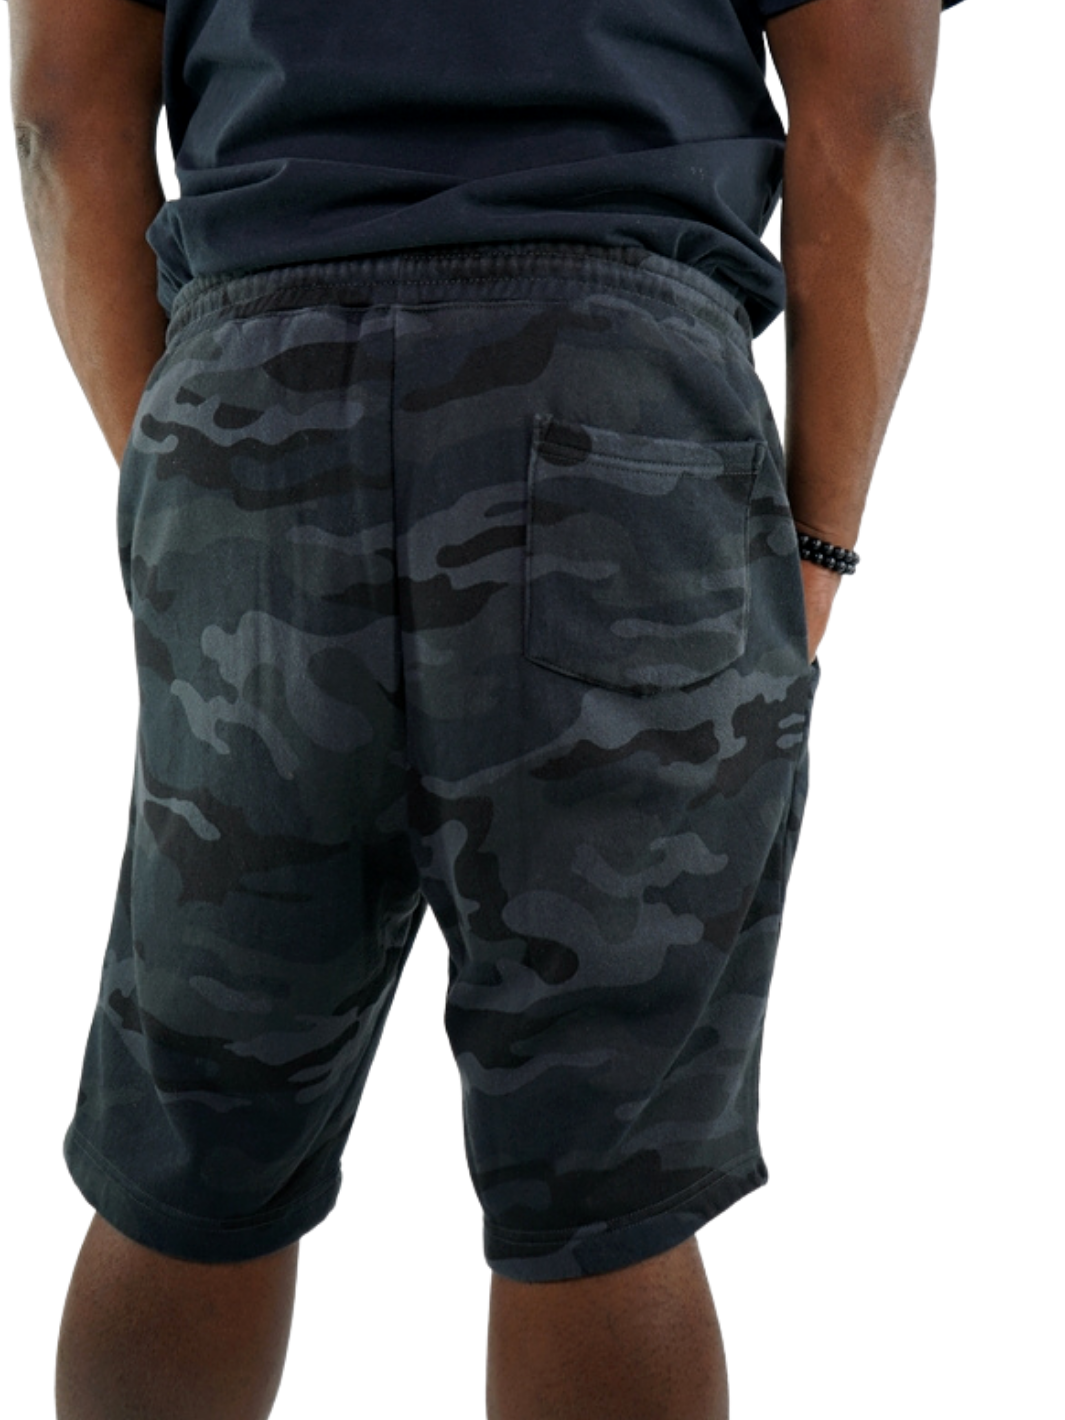 These actively casual GODinme shorts from our Romans 12 : 21 Collection come in a Black or Green Camouflage design. Complete with a bold embroidered logo and a shoestring draw cord in Red, to make a faithful statement wherever you go.